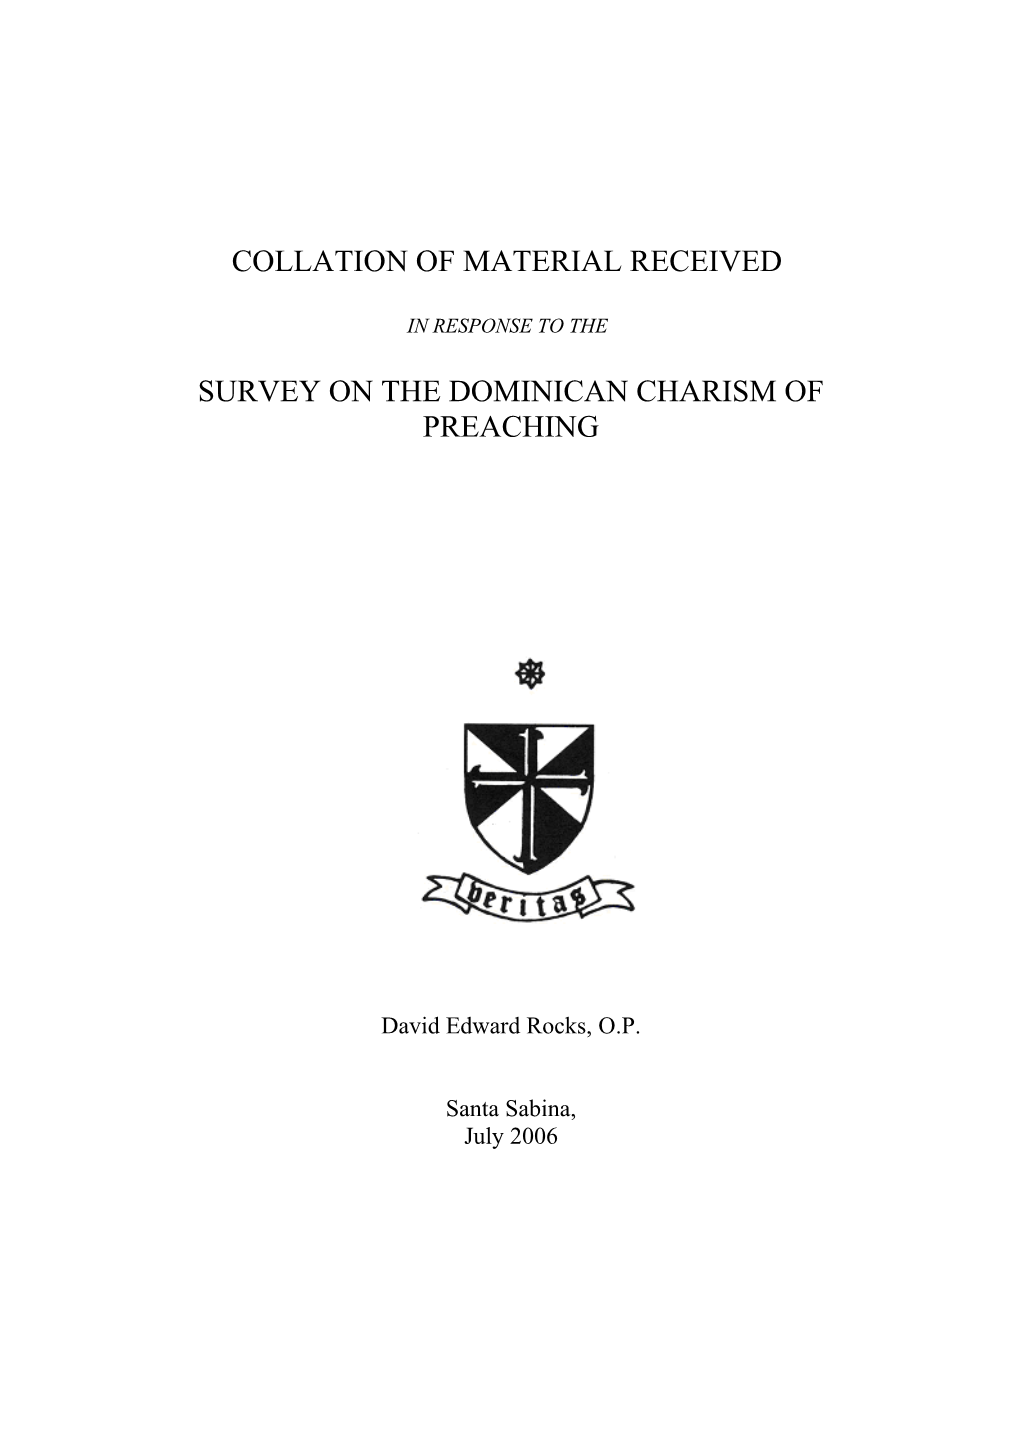 Survey on the Dominican Charism of Preaching